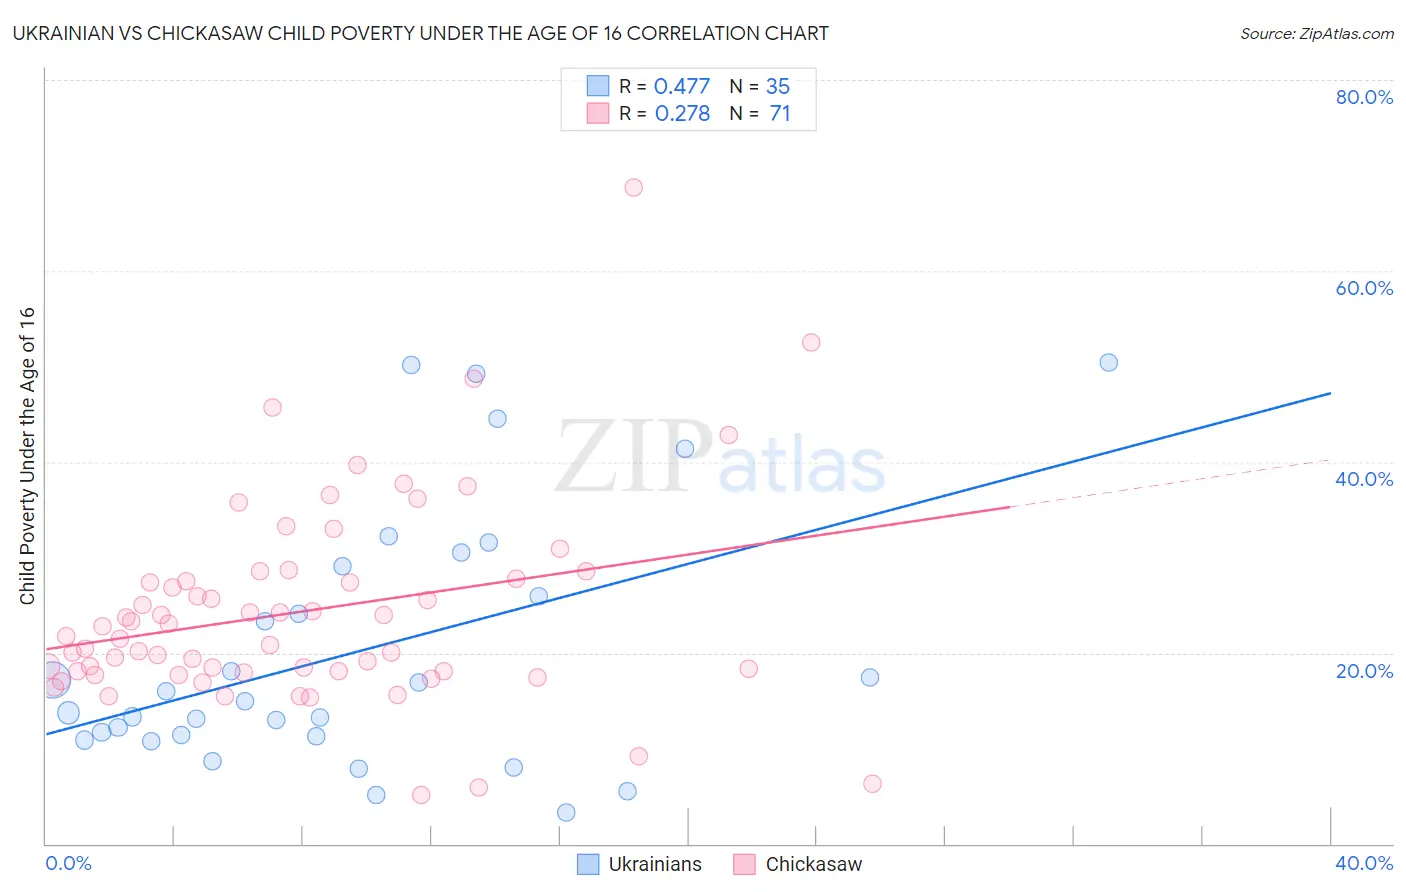 Ukrainian vs Chickasaw Child Poverty Under the Age of 16